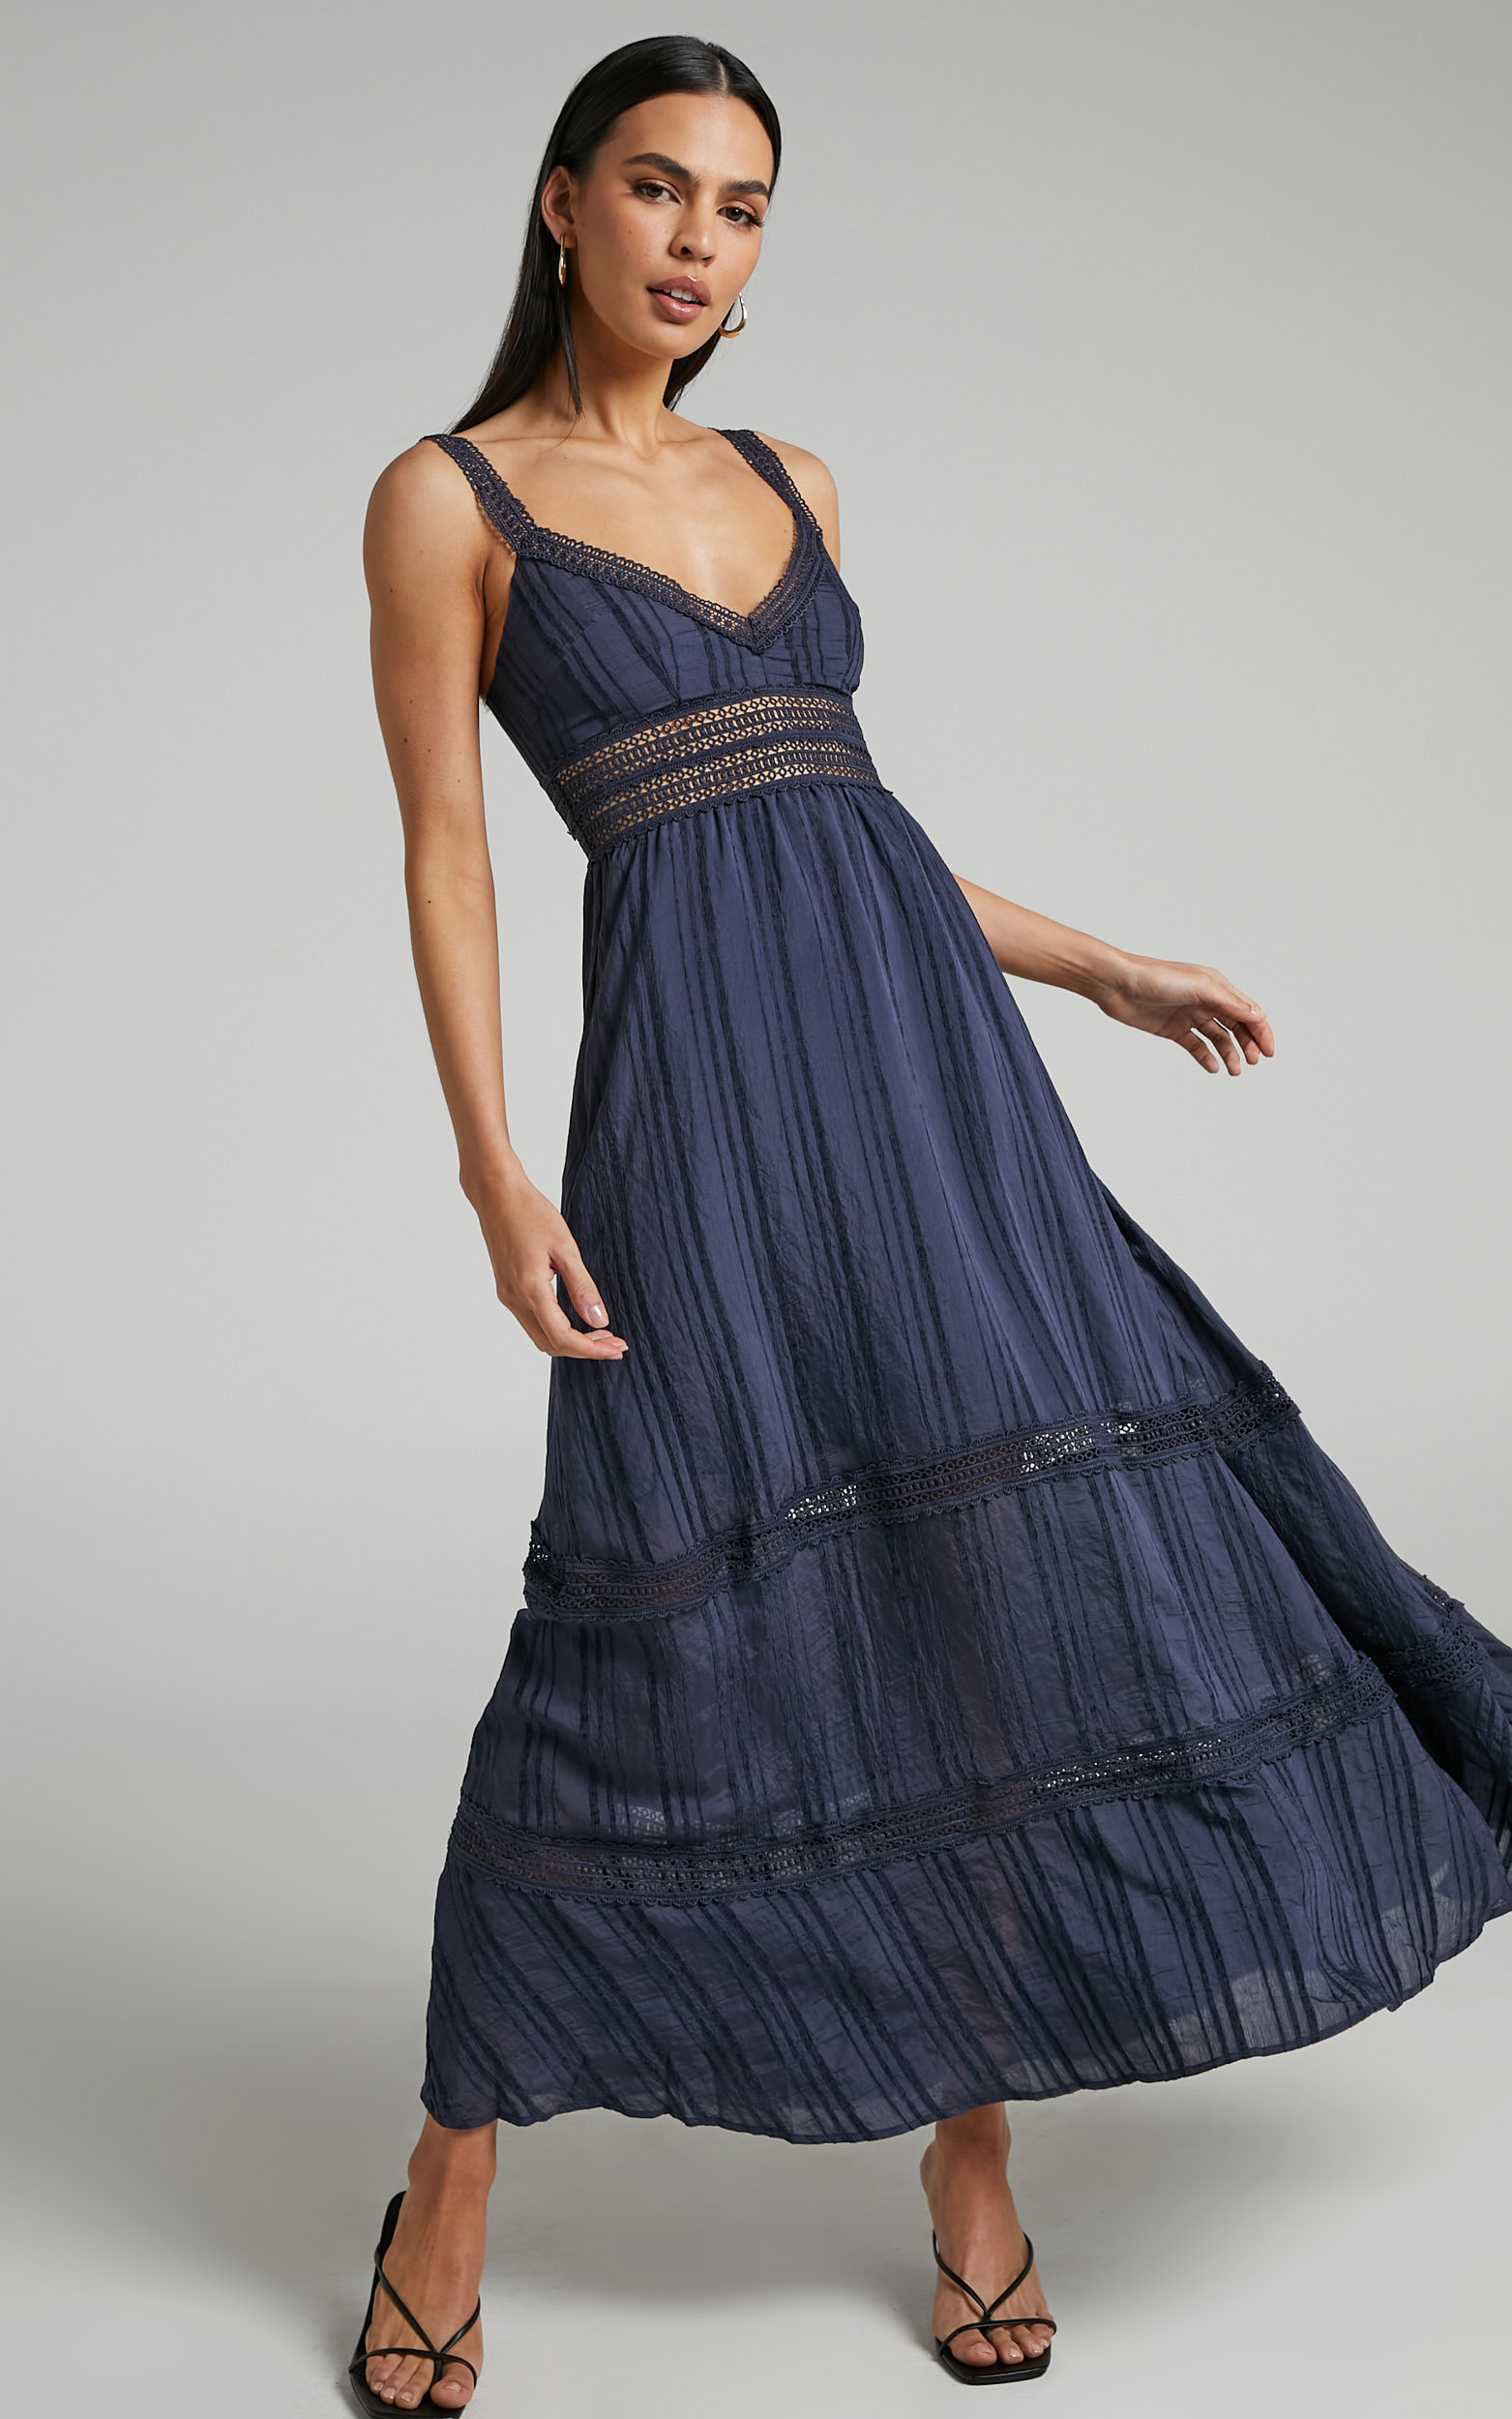 Angelique Lace trim Maxi Dress in Navy - 04, NVY1, hi-res image number null